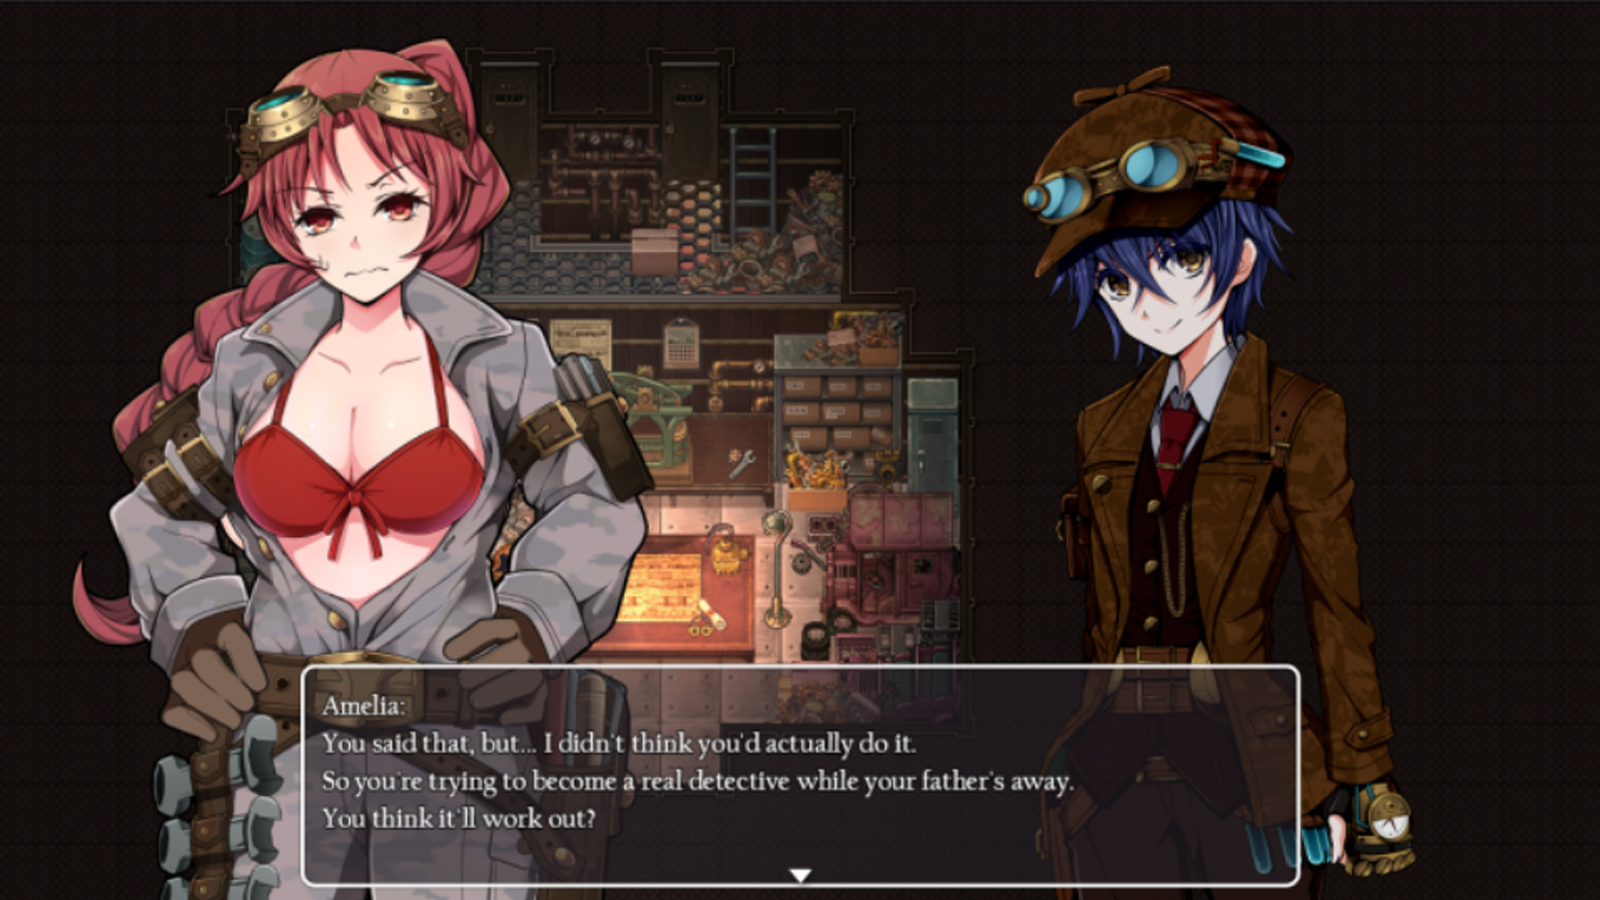 Find pricing, reviews and other details about Detective Girl of the Steam City